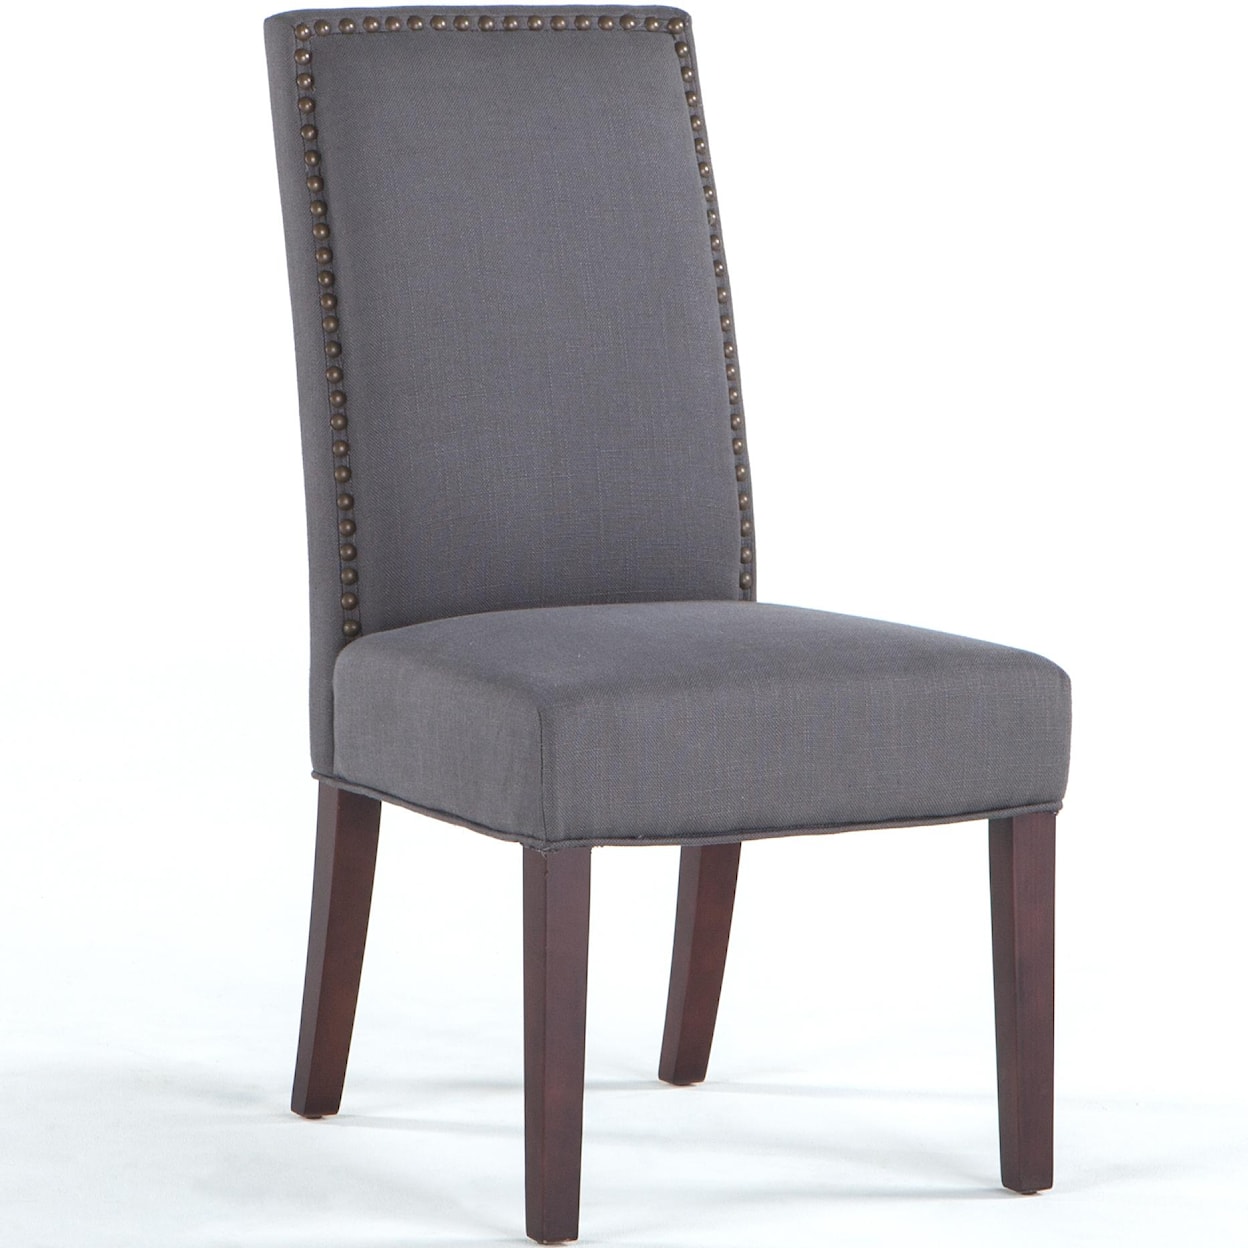 Home Trends & Design G206 Dining Side Chair